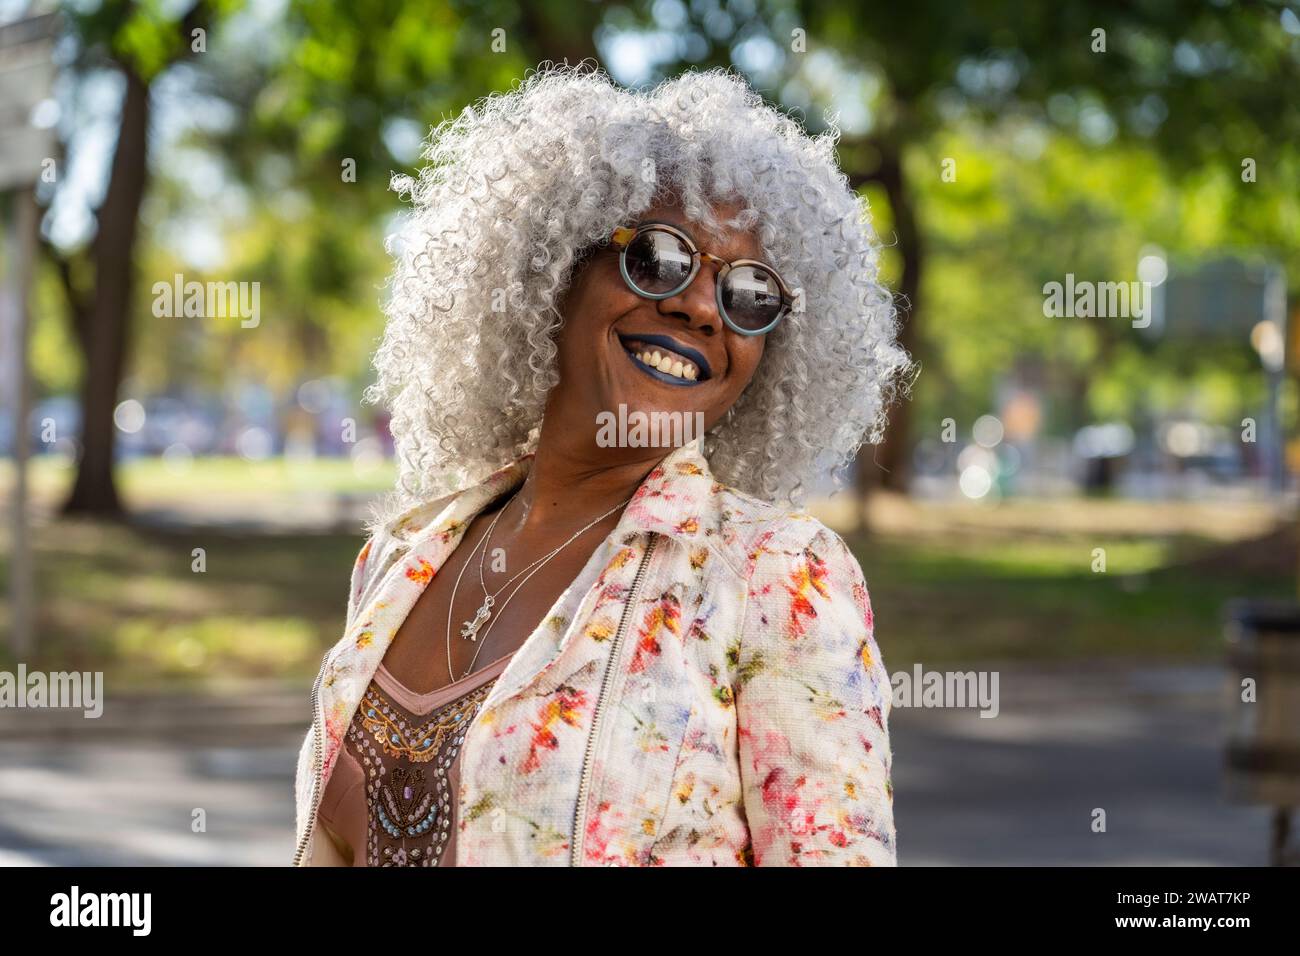 Self-confident, black lady with hoary afro hair and sunglasses smiling while walking in a sunny city center. Concept: pro-aging, happiness Stock Photo